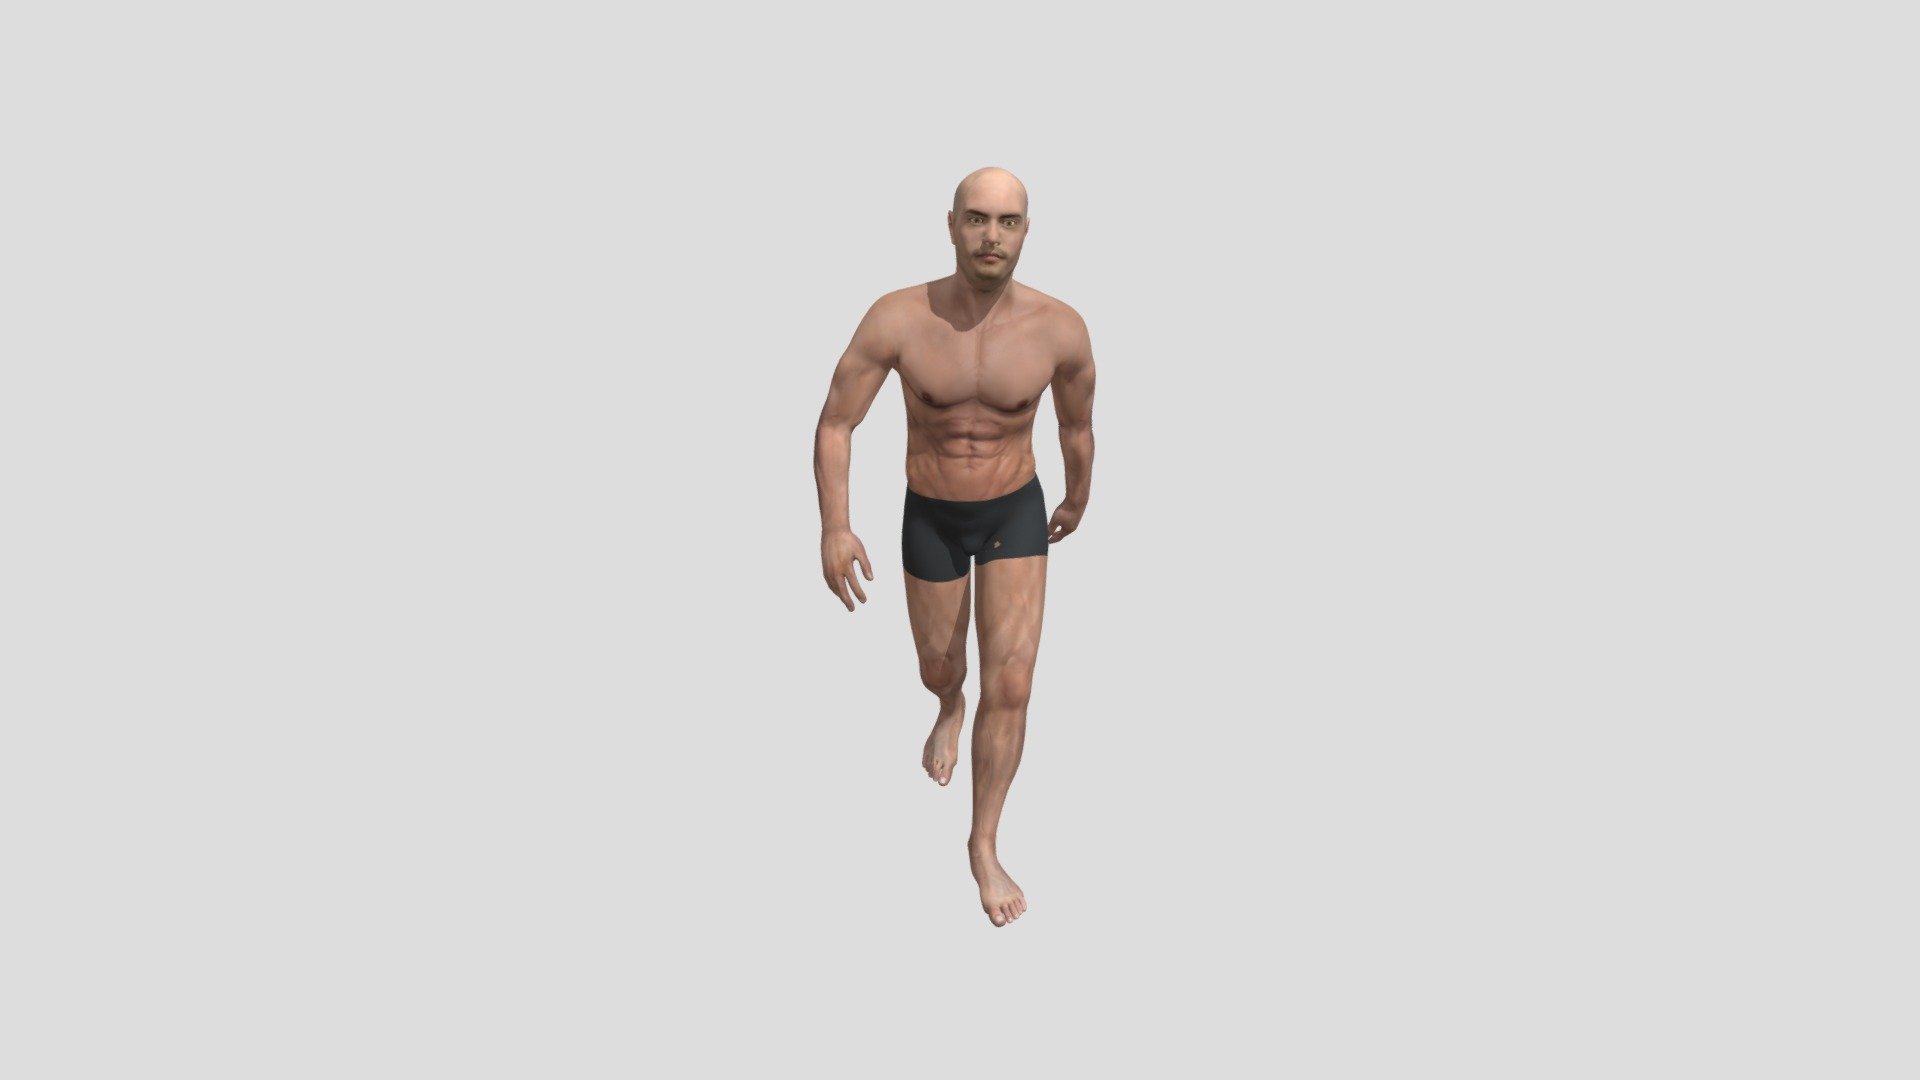 Realistic, rigged and animated man character. High detailed textures (8192 x). 

Real-world scale




objects named and organized in layer explorer

rigged and animated with biped

walk, run and wrestling position animations. 

Skin modifier

Eye orientation constraint

Jaw bone lowers lower teeth for use with morph expressions

Eye-lash geometry and bones

Eye reflection

Various face expressions with Morpher modifier

compatible with Mocap data

no genitals 

gums, tongue and teeth shape and texture

real-world scale 

Polygon Faces: 

body: 30278
single upper eye-lashes: 1750
single lower eye-lashes: 1650
upper teeth: 5862 
lower teeth: 5496
tongue: 856
gums: 6064

Available file formats:

Made in 3ds max but only FBX  2016/2017 format here for now until I upgrade account.

FBX files have mapping coordinates, basic rig, skin, morpher modifier, and animations in separate fbx files. 

Max, FBX animated and OBJ files! - Athleticus - 3D animated man model - Buy Royalty Free 3D model by virtual_creator 3d model